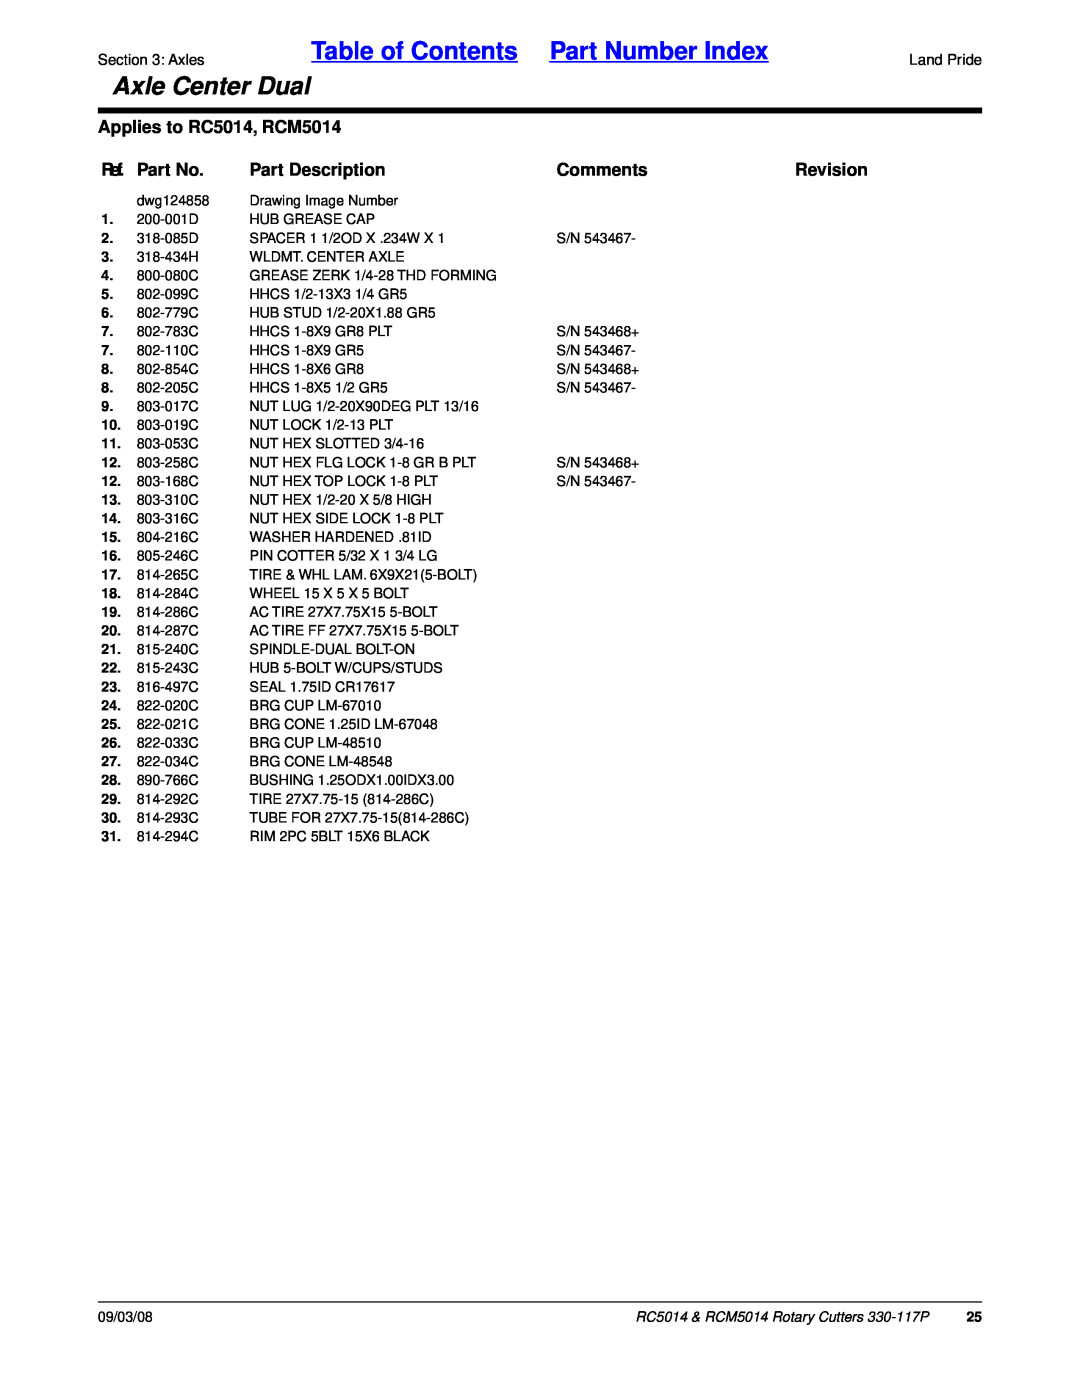 Land Pride Table of Contents Part Number Index, Axle Center Dual, Applies to RC5014, RCM5014, Ref. Part No, Comments 